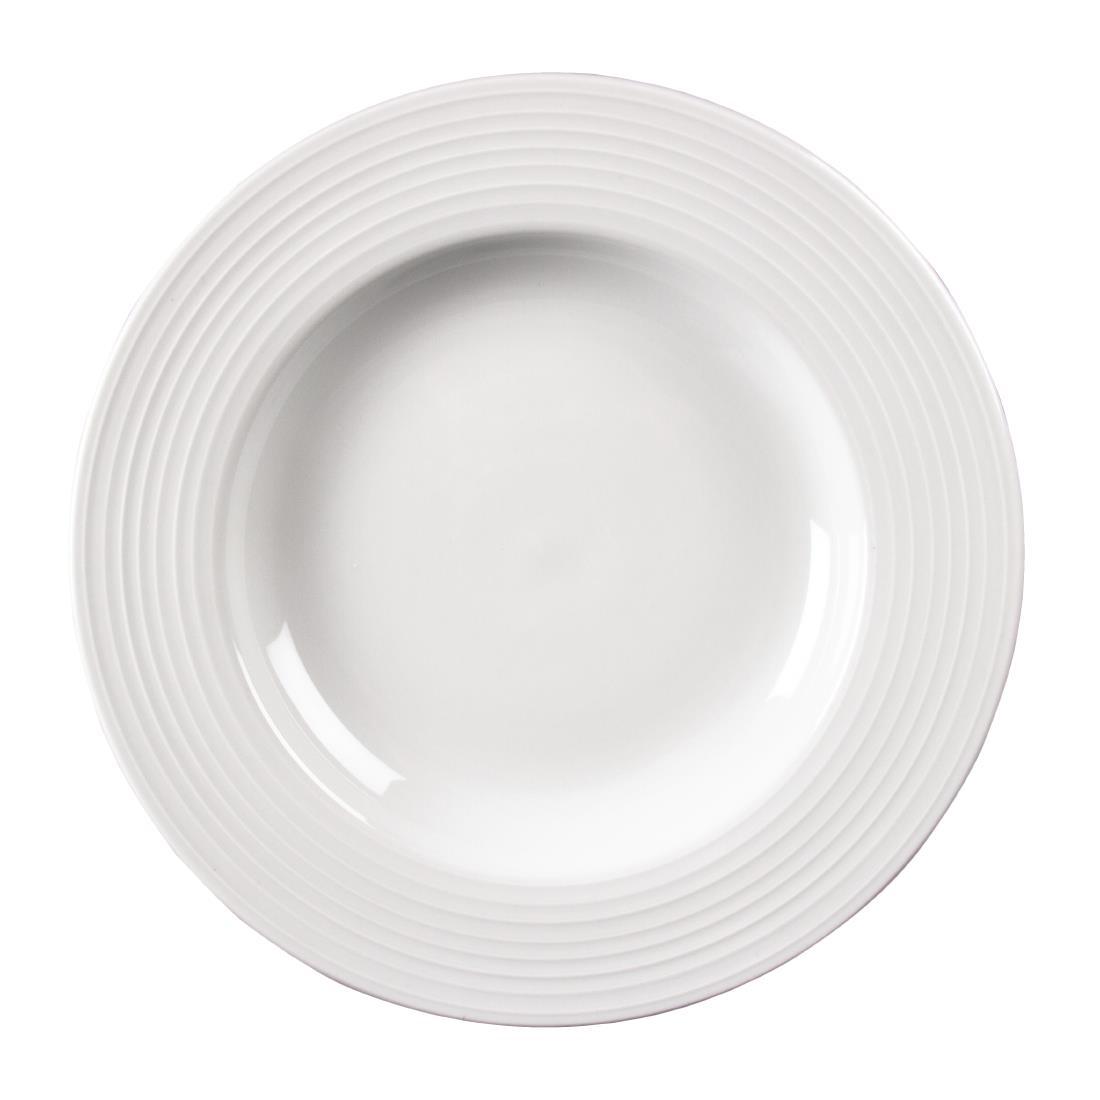 Olympia Linear Pasta Plates 310mm (Pack of 6) - U096  - 3